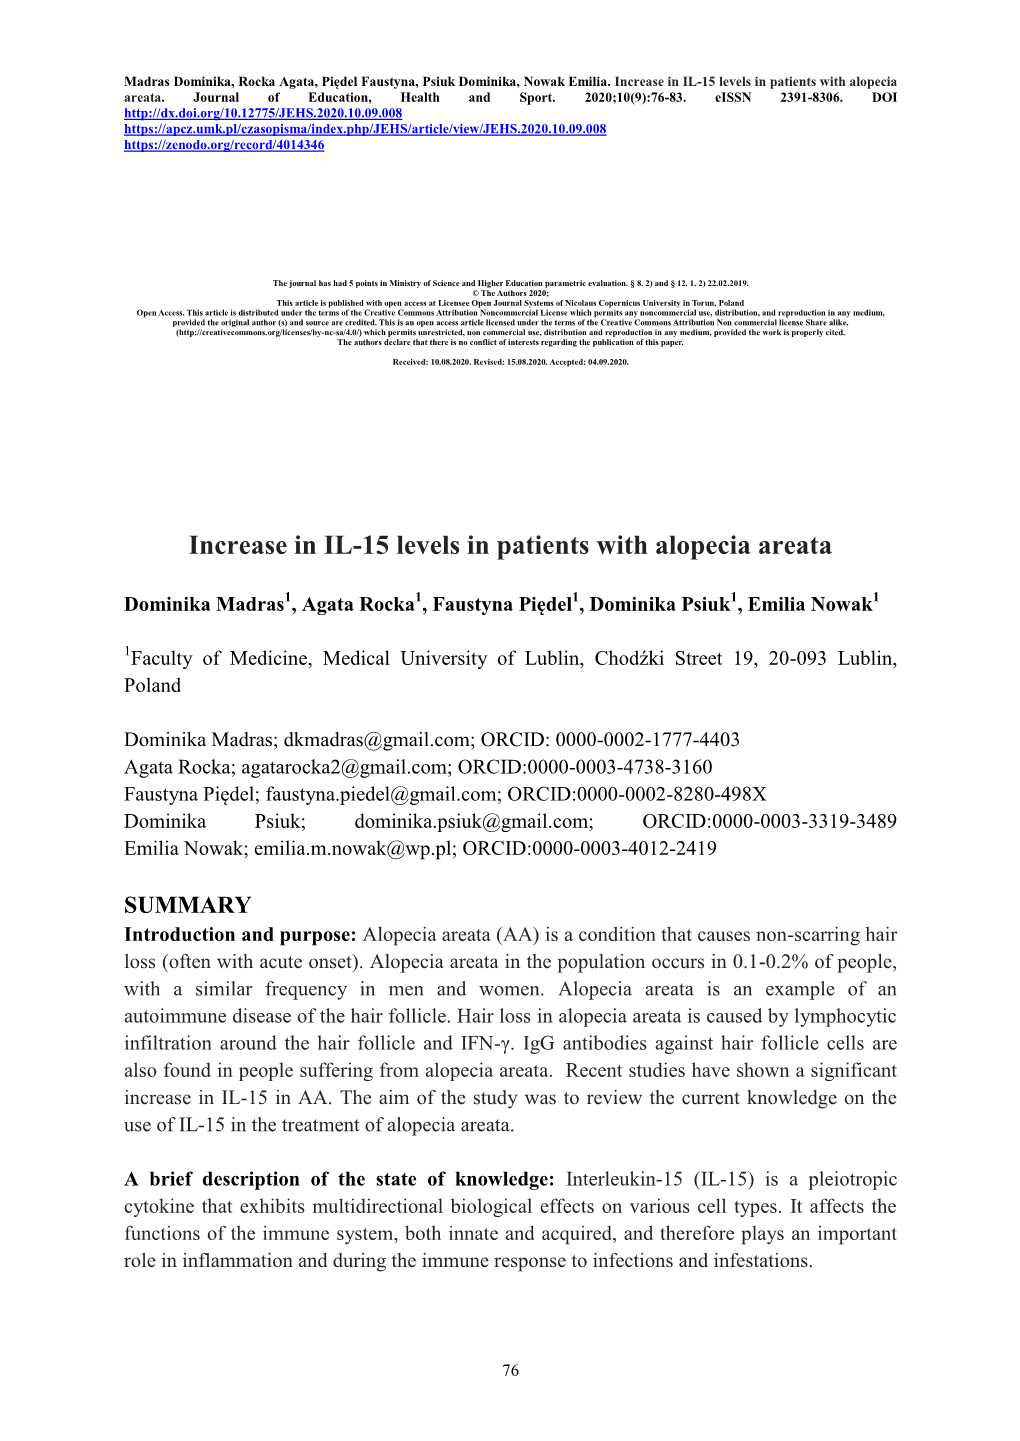 Increase in IL-15 Levels in Patients with Alopecia Areata